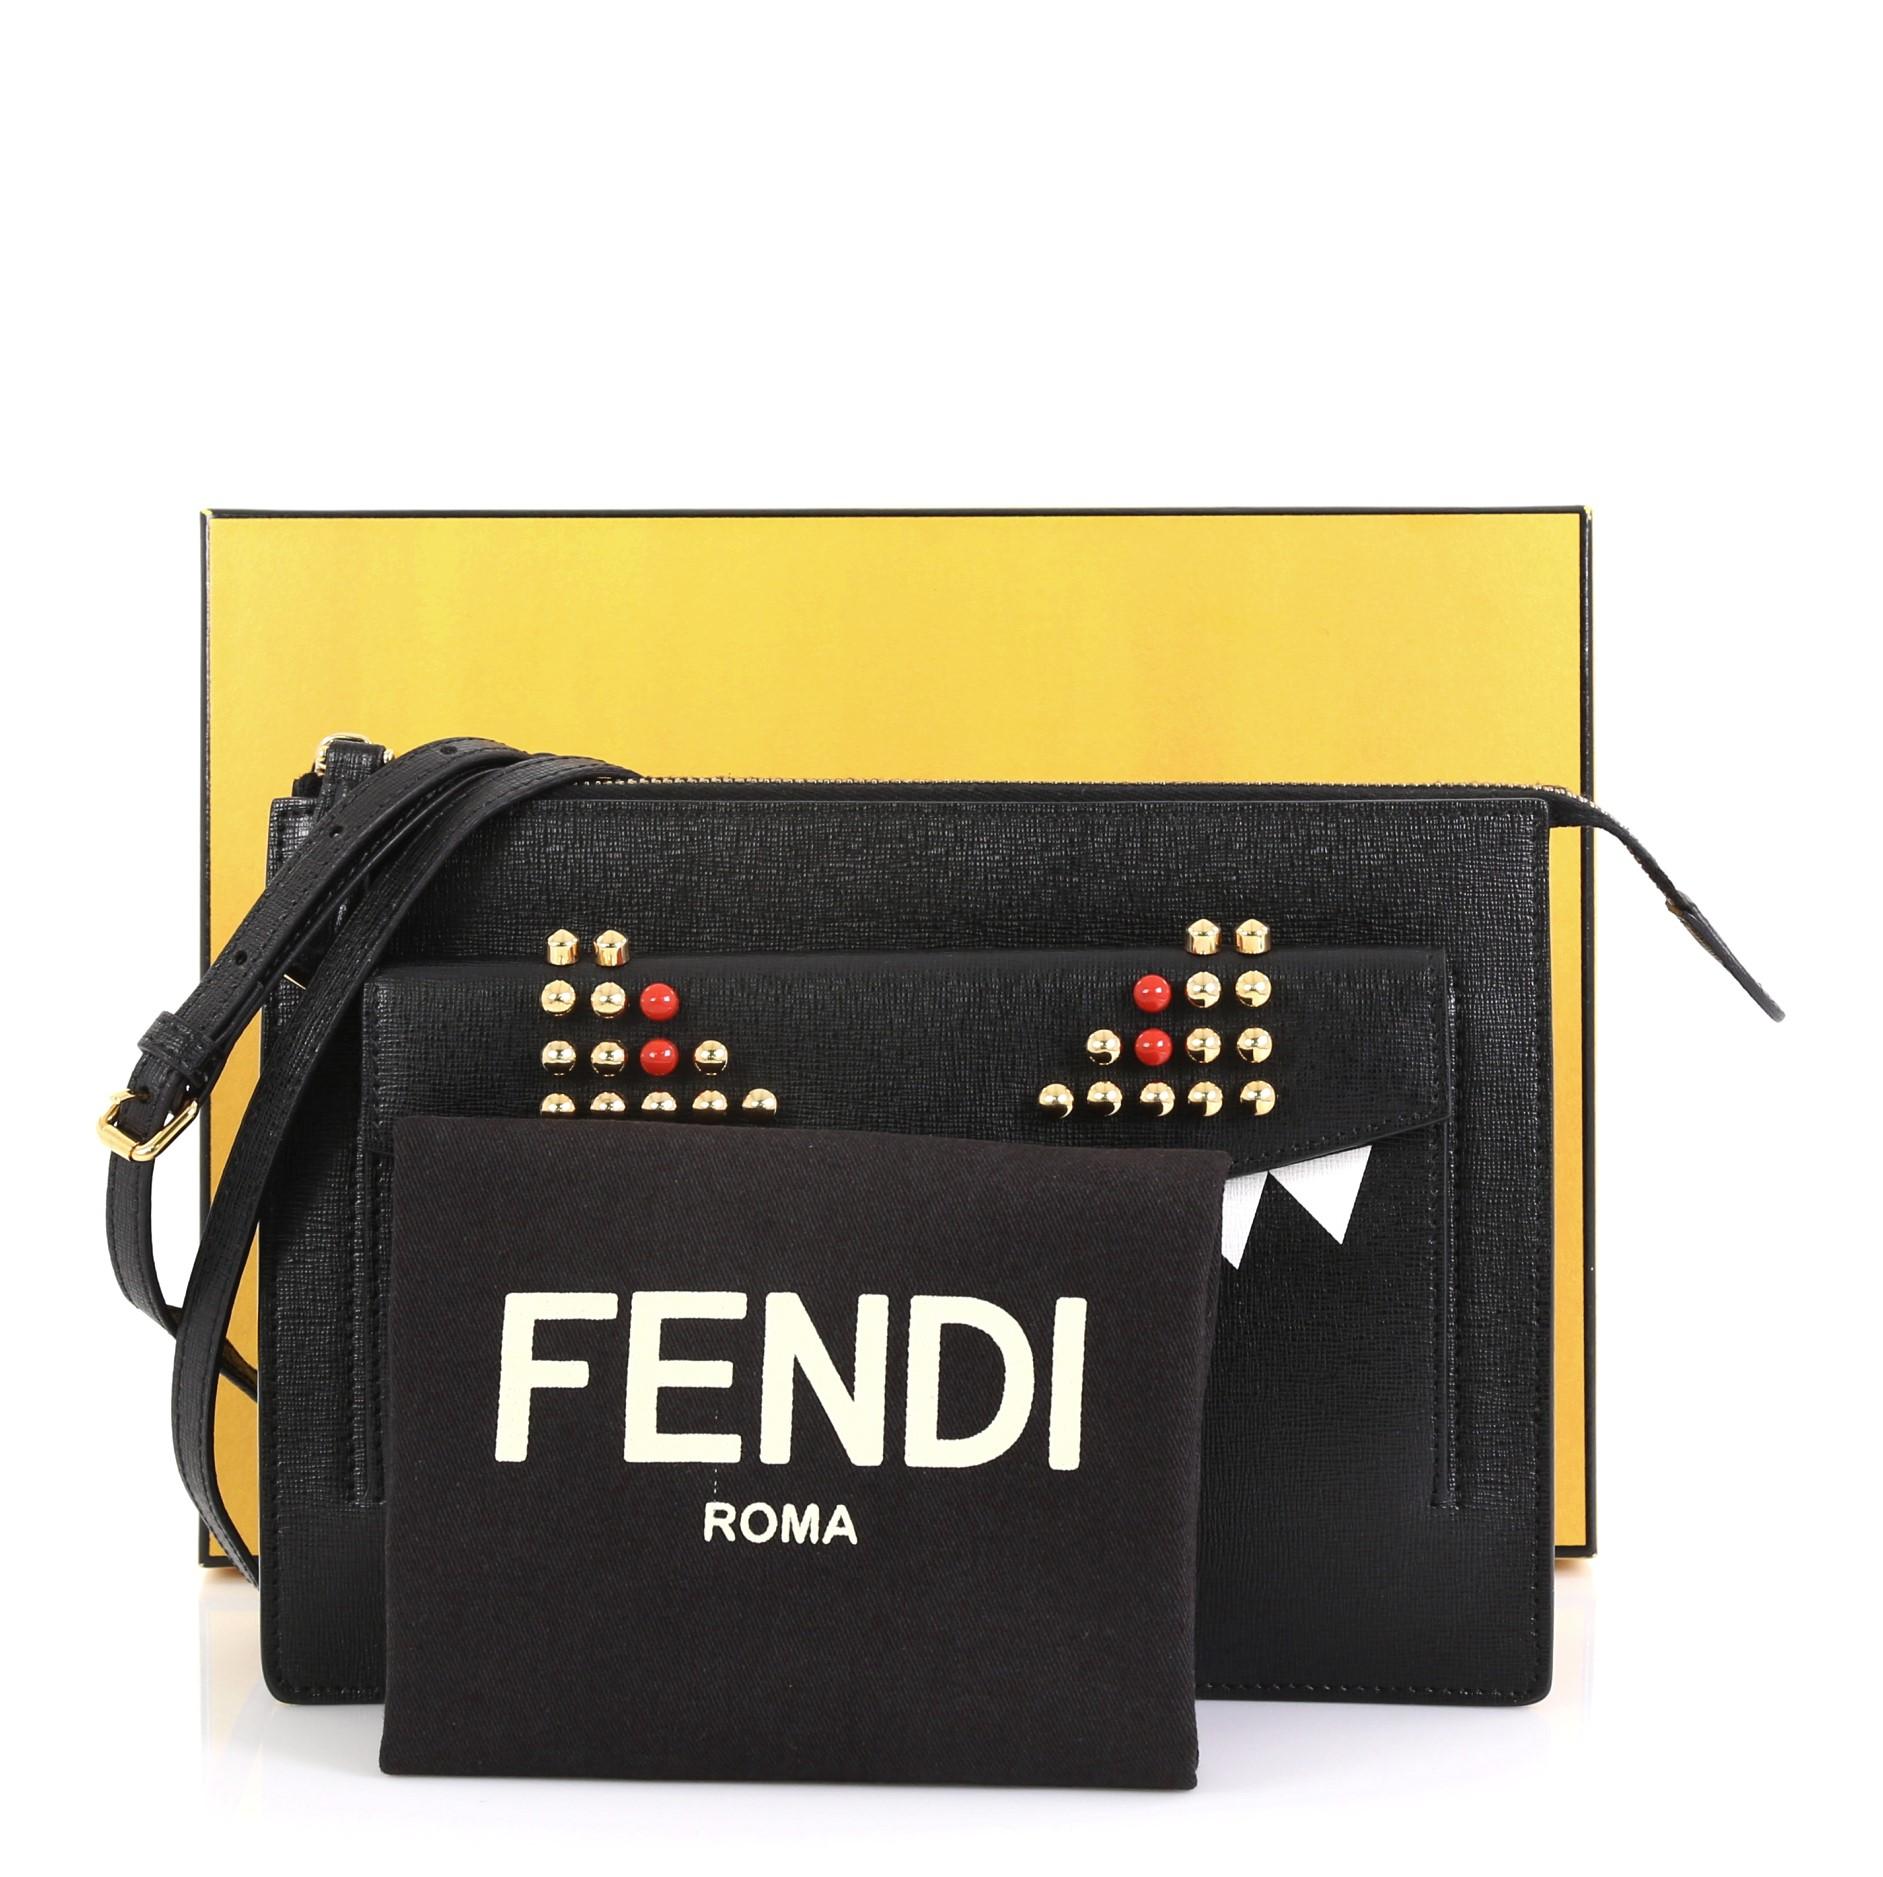 This Fendi Monster Crossbody Bag Leather, crafted from black leather, features adjustable crossbody strap, exterior front flap pocket, monster design with painted teeth, gold and red studded eyes, and gold-tone hardware. Its zip closure opens to a